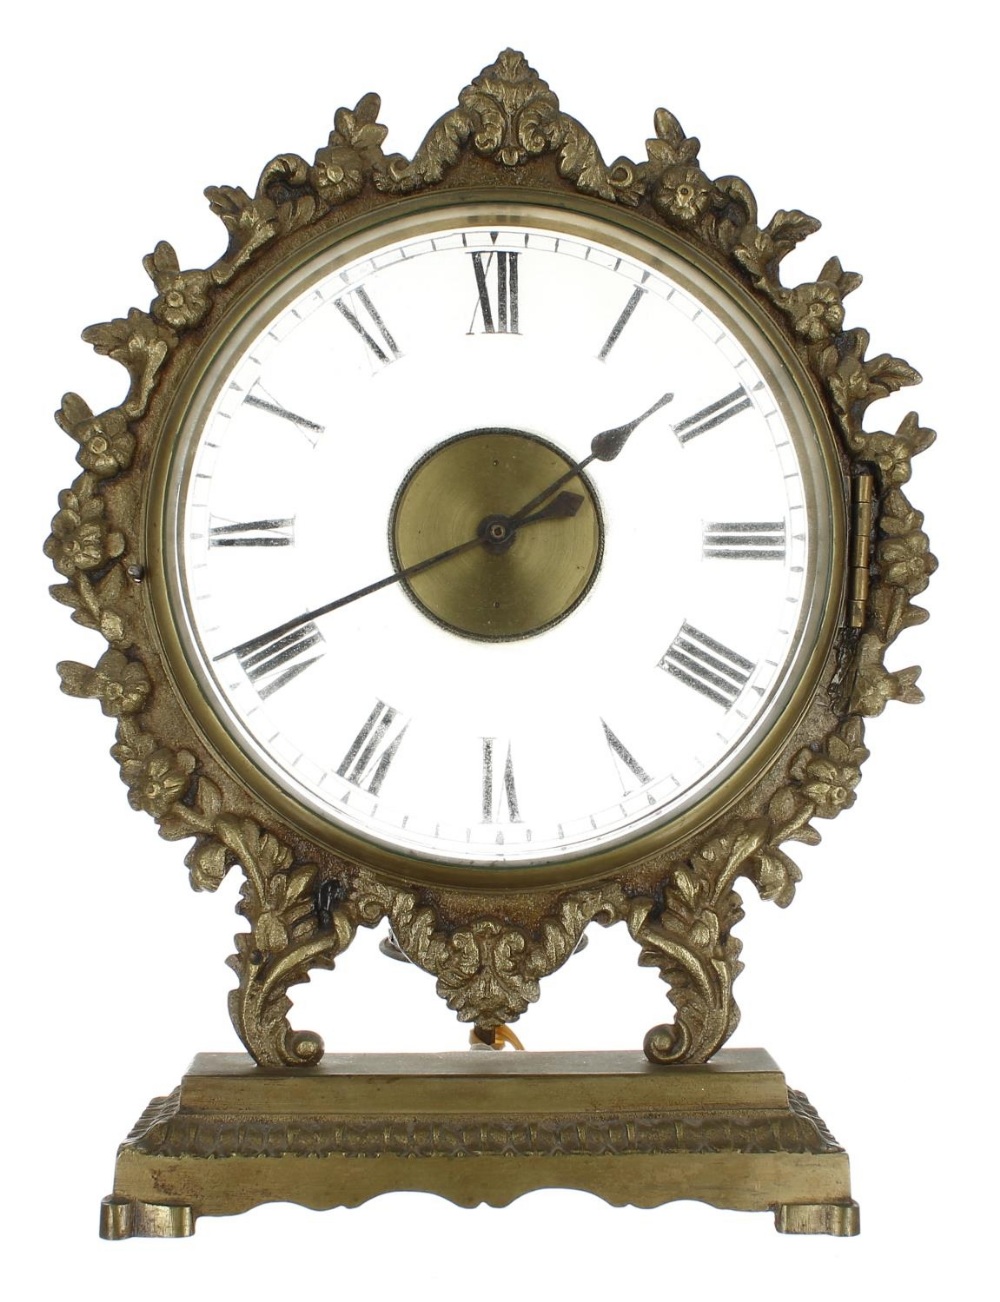 Interesting brass night clock, the 6.5" glass chapter ring fitted with a pocket watch movement to